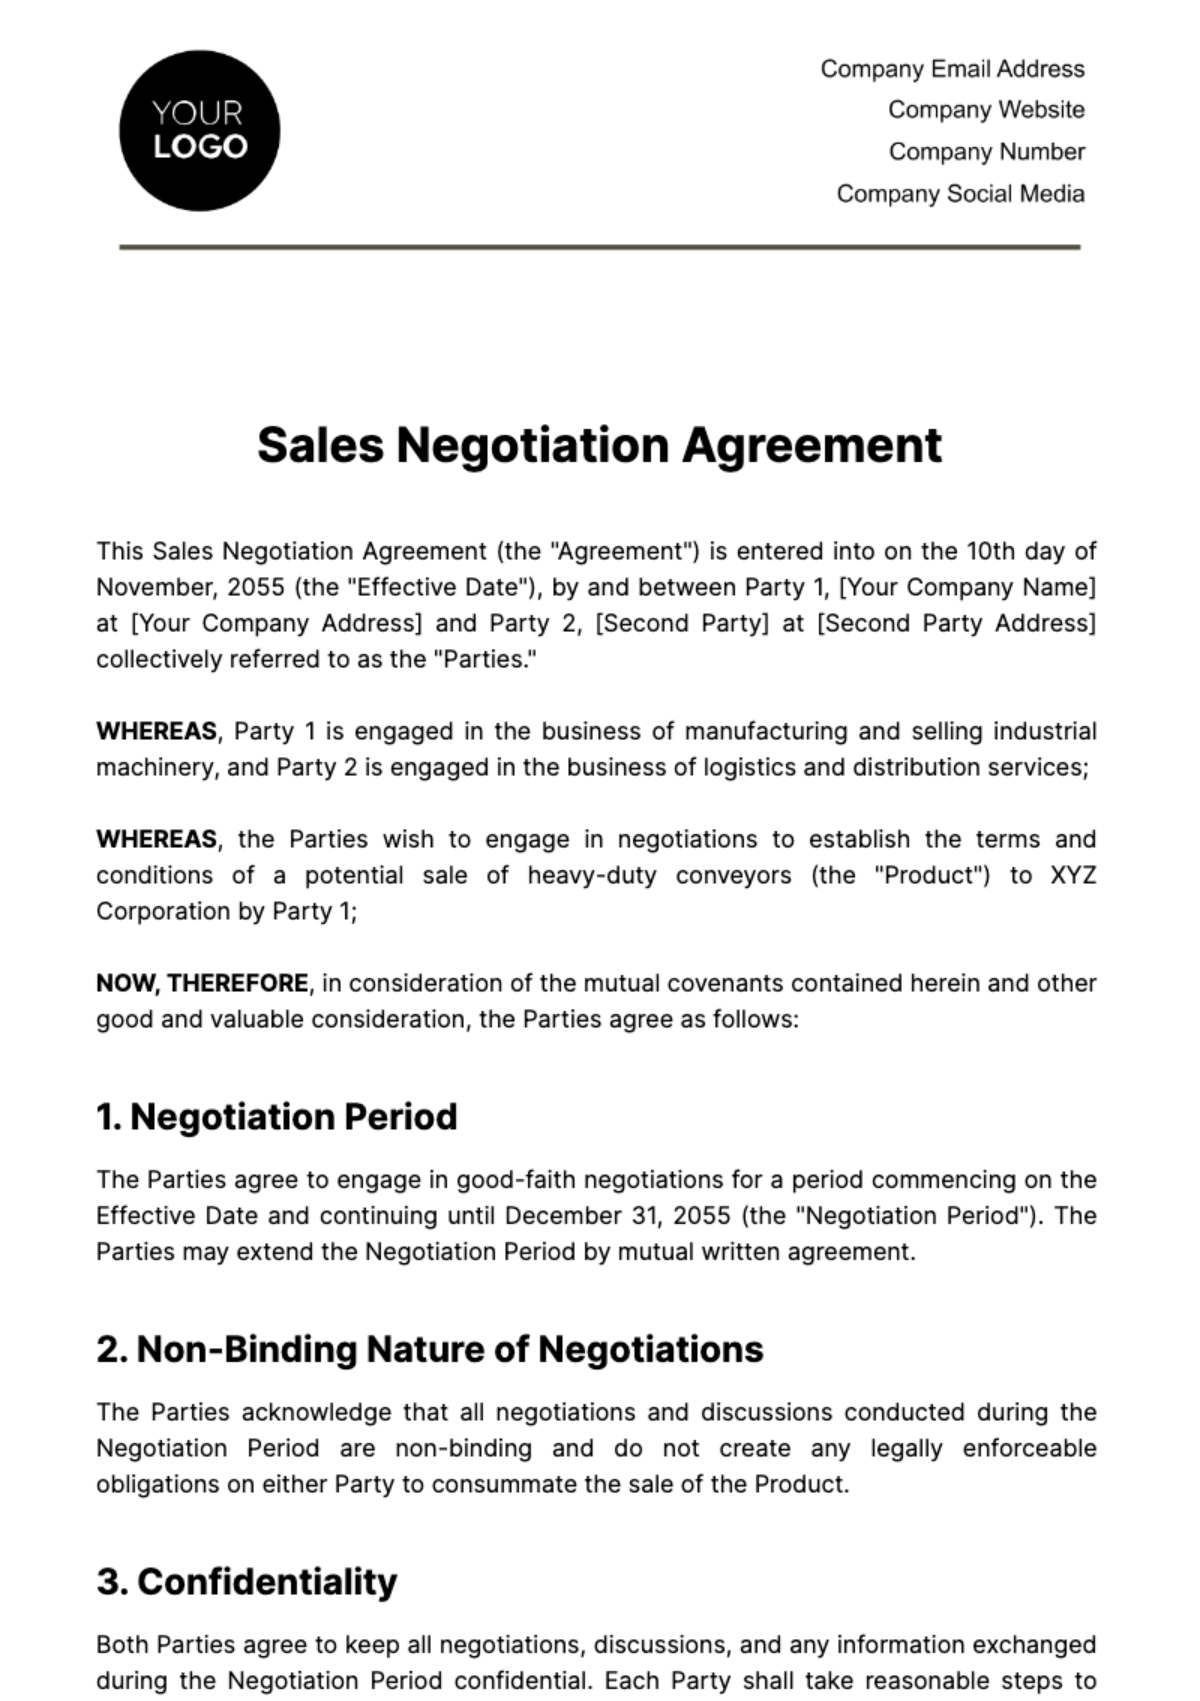 Free Sales Negotiation Agreement Template